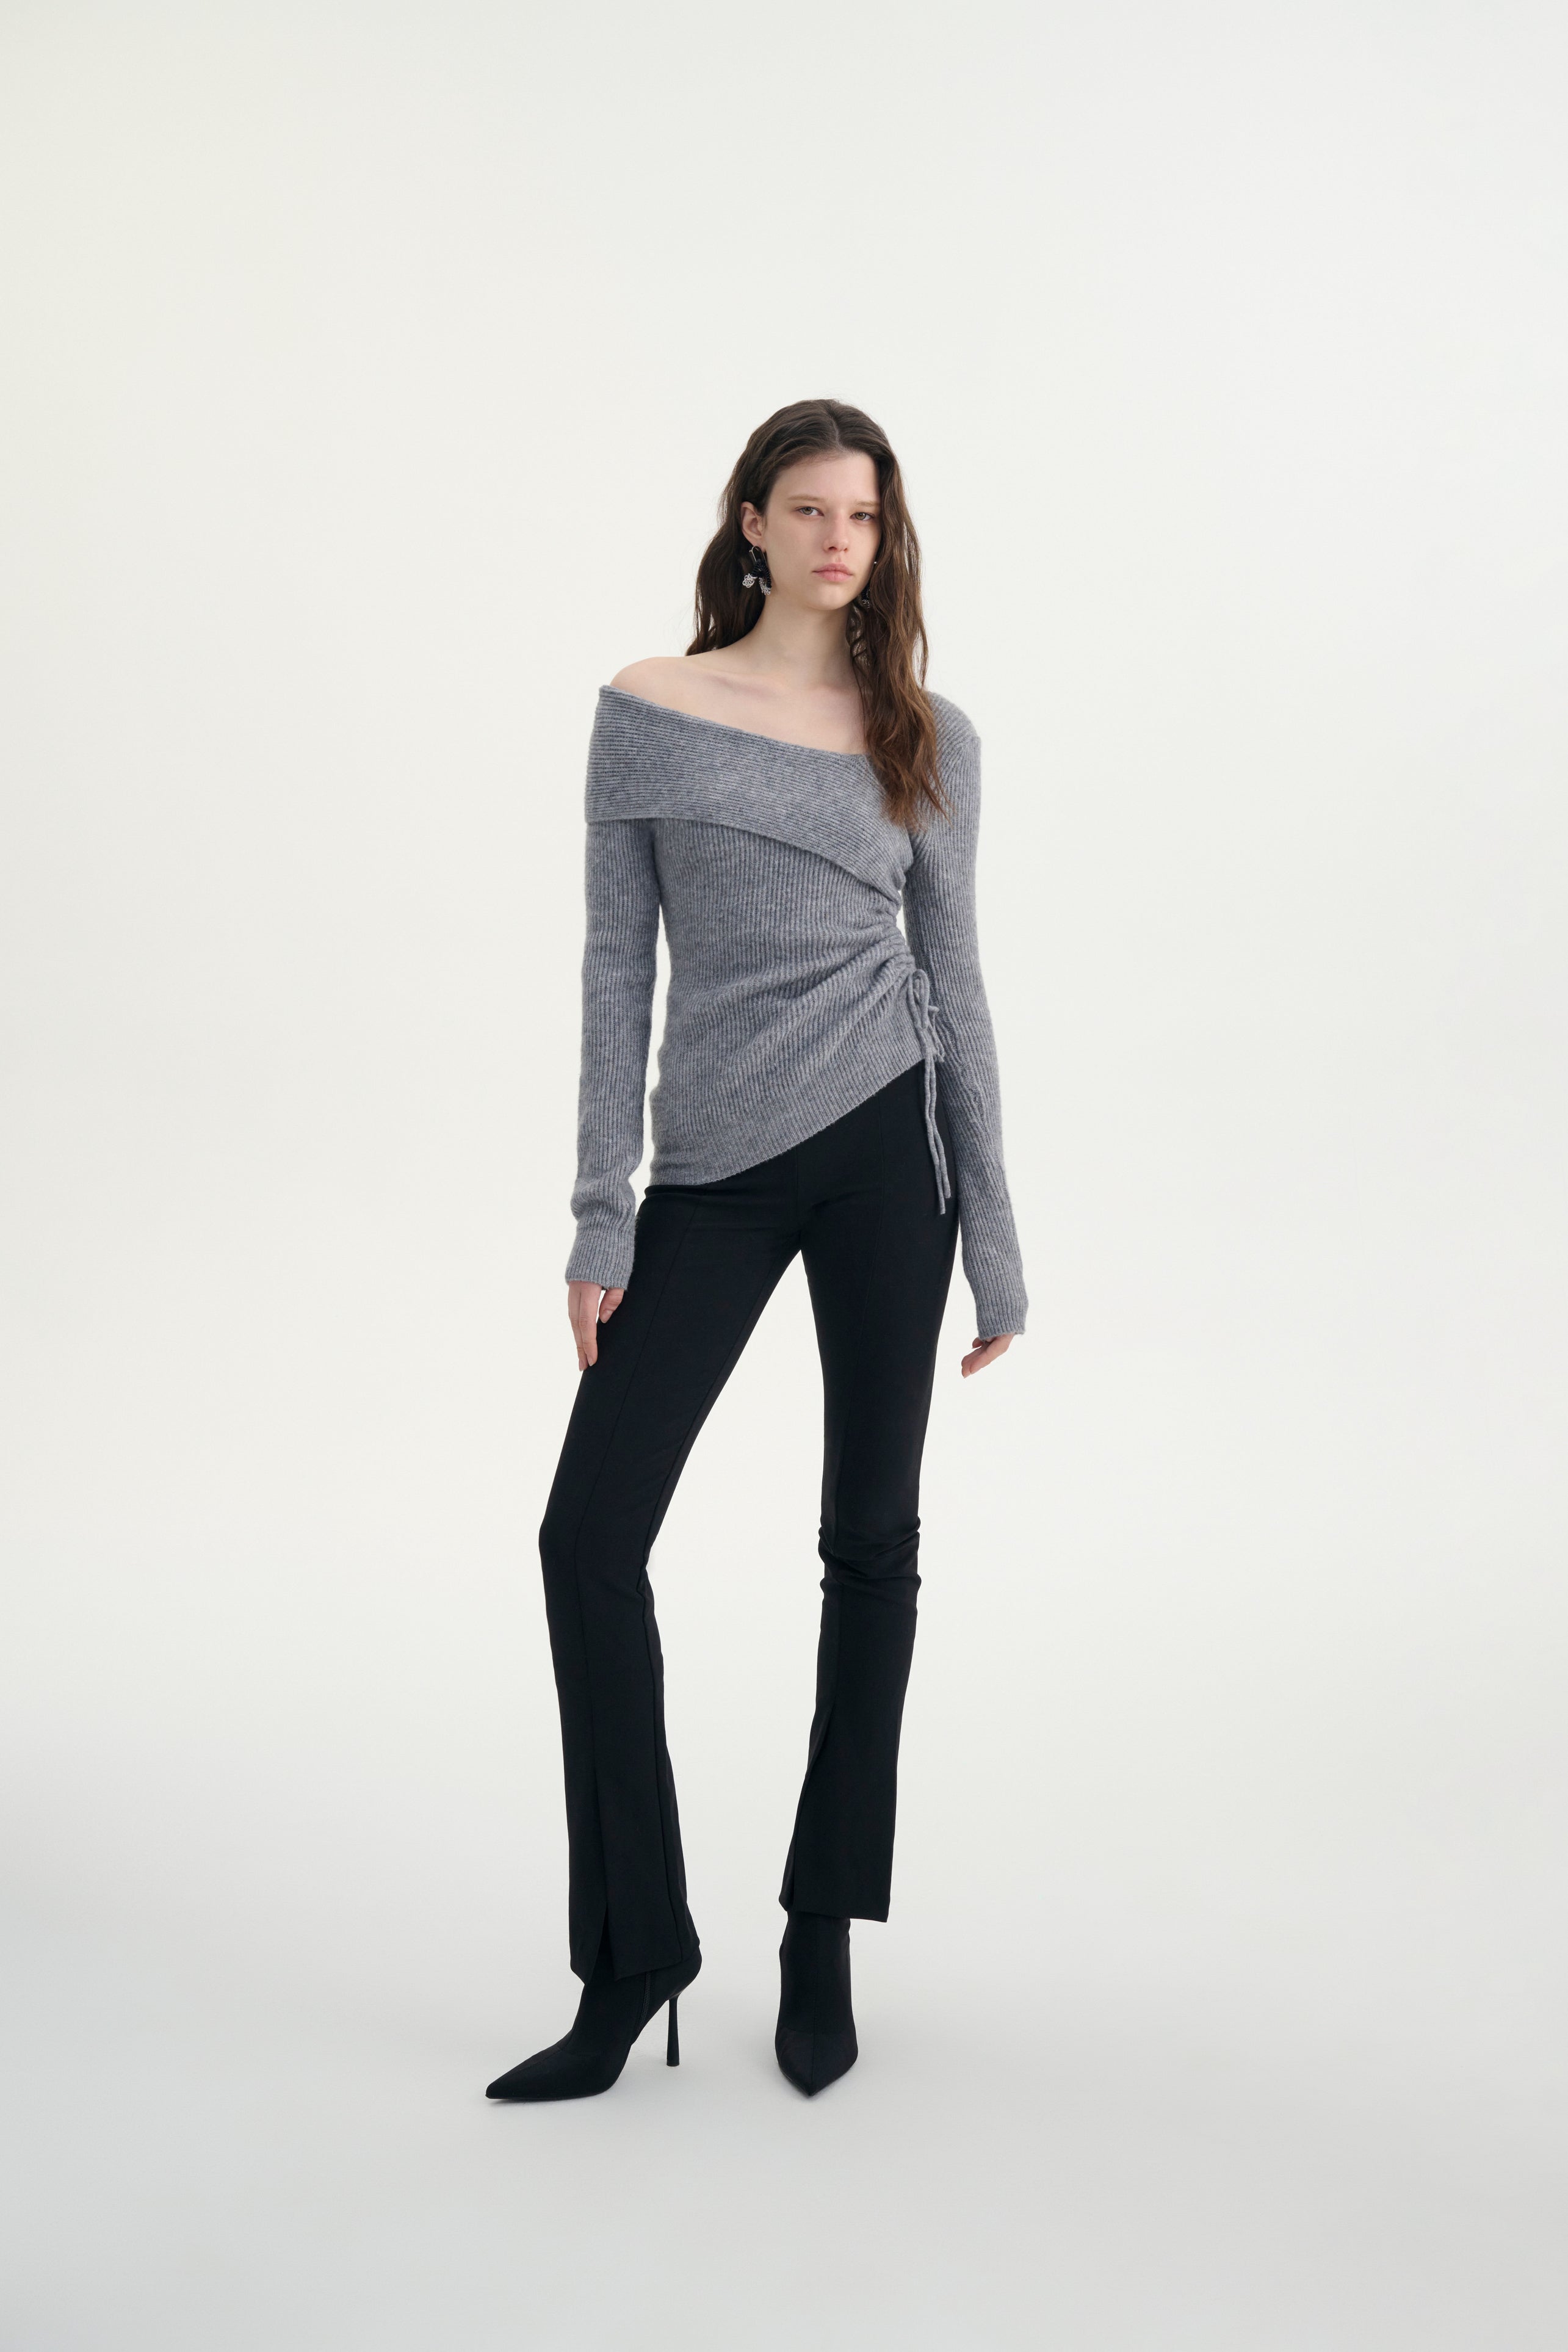 Asymmetrical ruched sweater